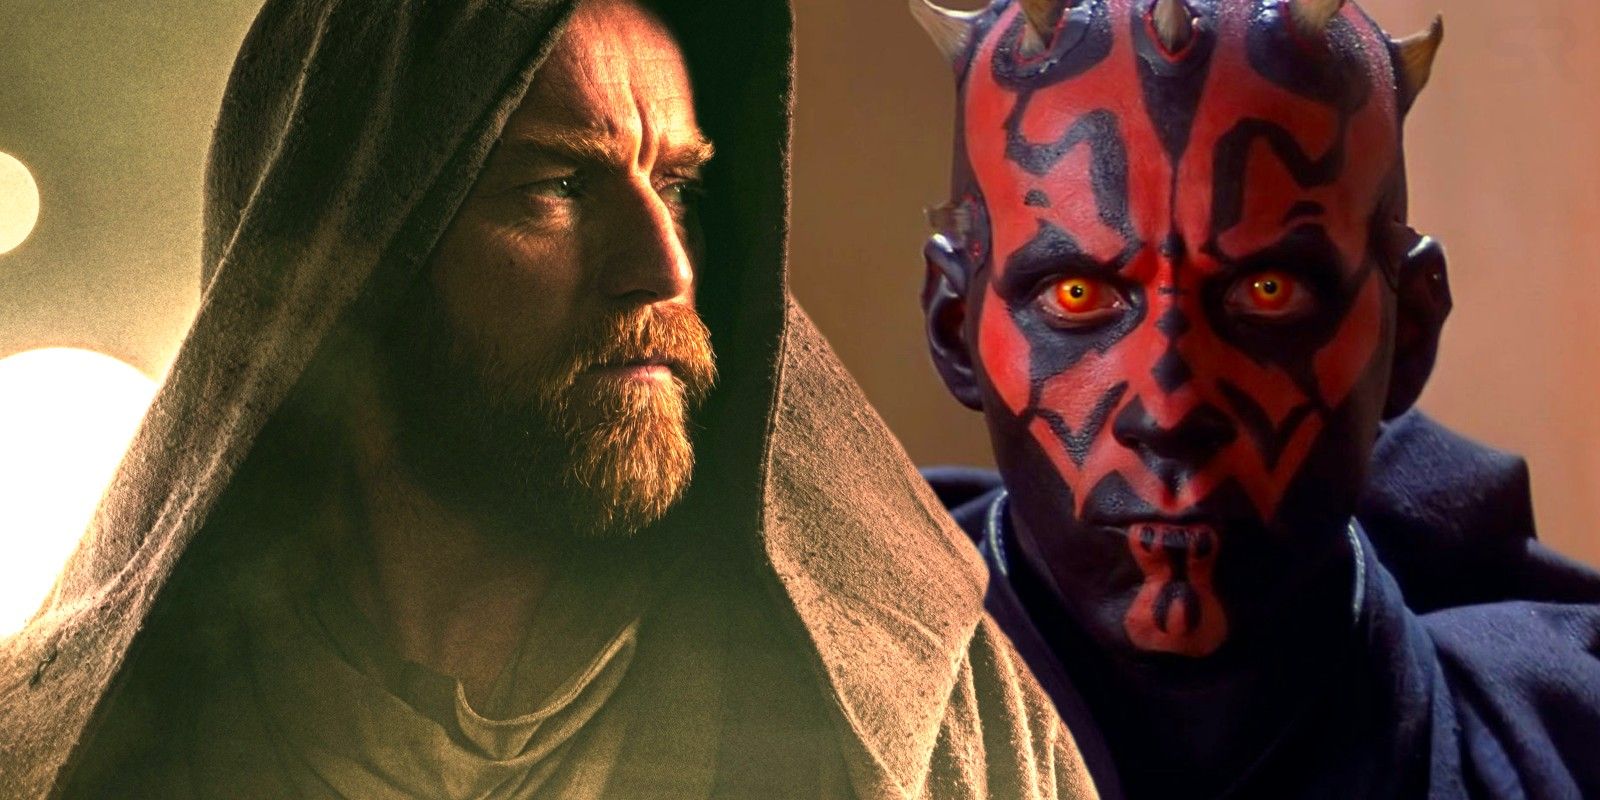 obi-wan-show-release-date-revealed-has-perfect-star-wars-connection